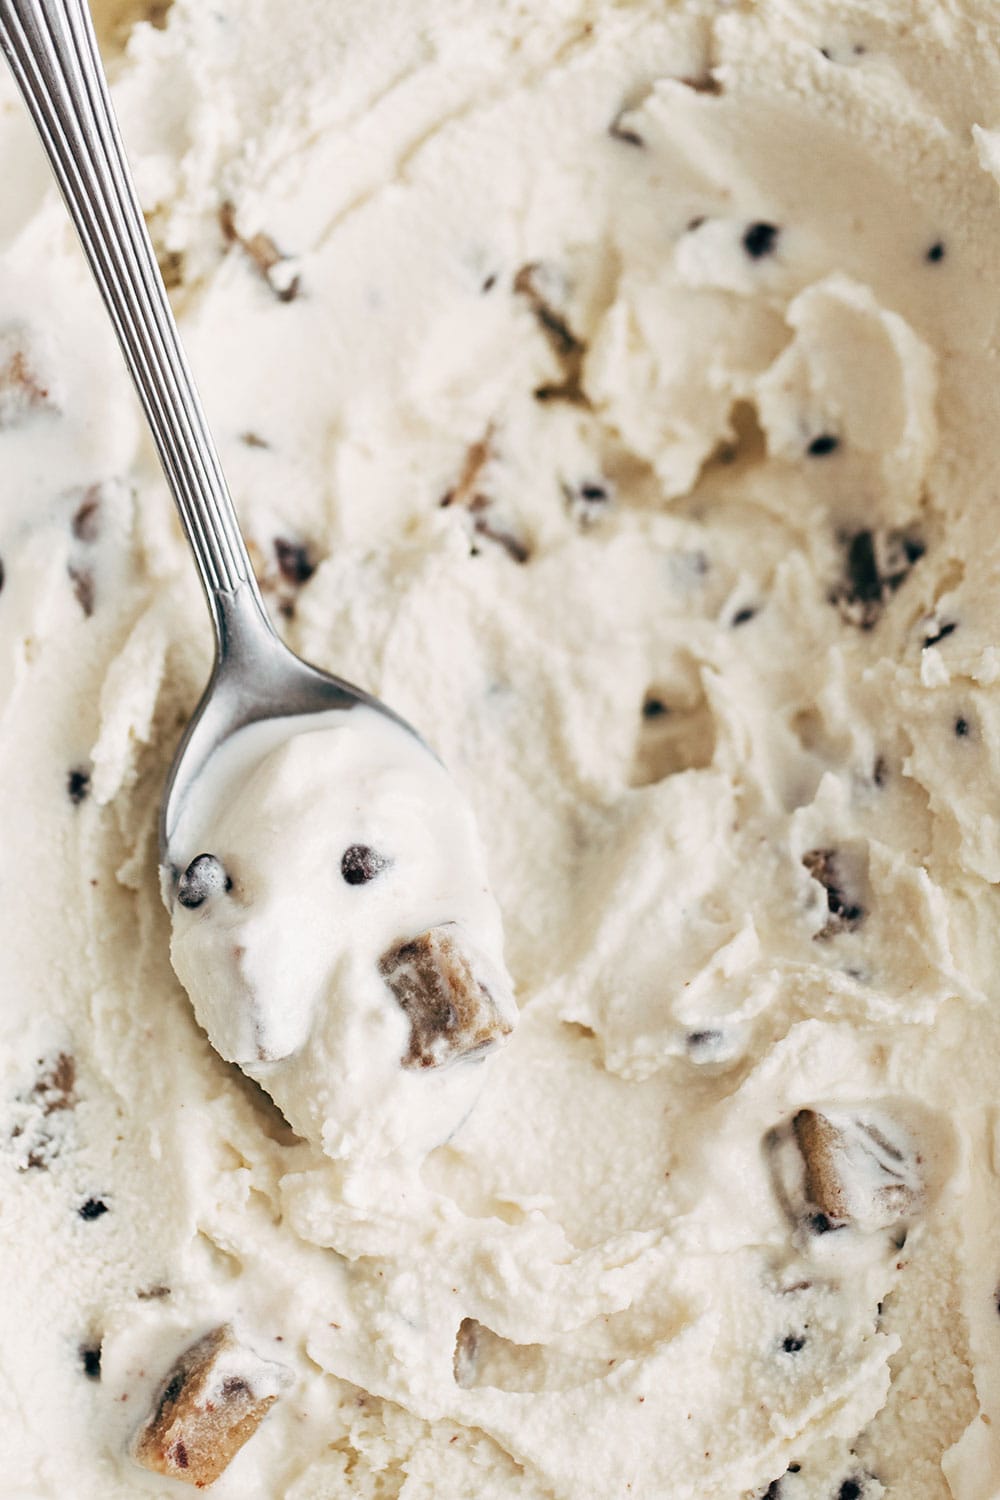 Rich and creamy chocolate chip cookie dough ice cream with spoon